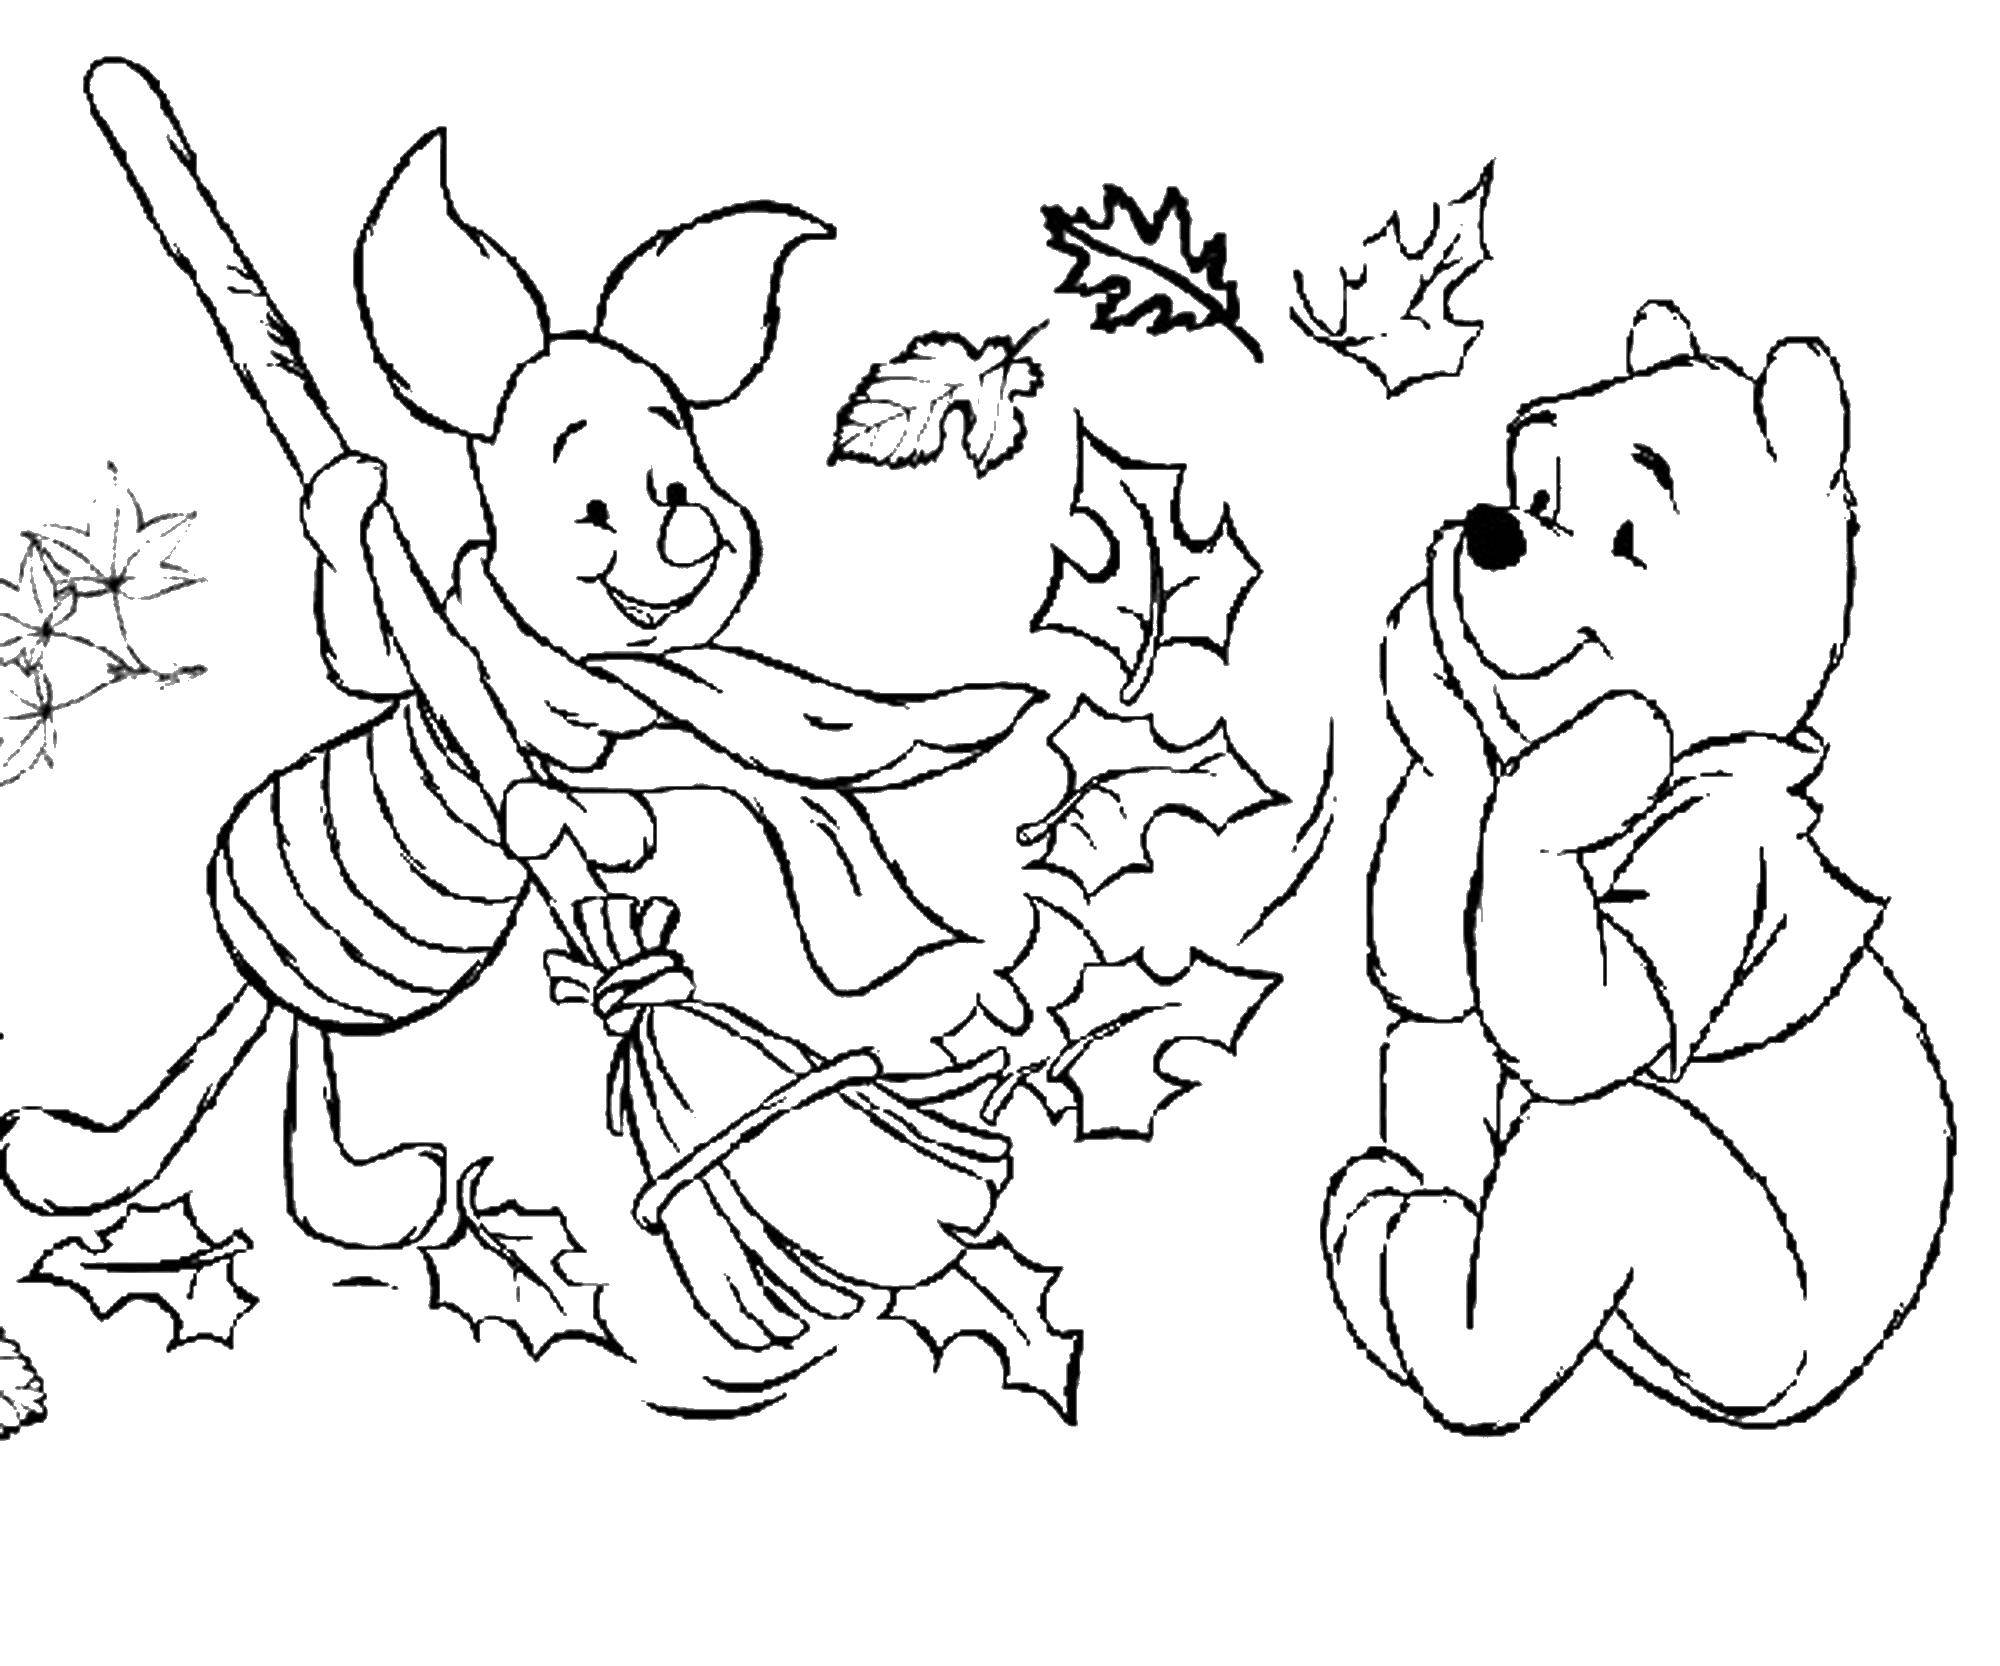 Coloring Winnie the Pooh and Piglet clean sheets. Category Disney cartoons. Tags:  Disney, cartoons, Winnie the Pooh.